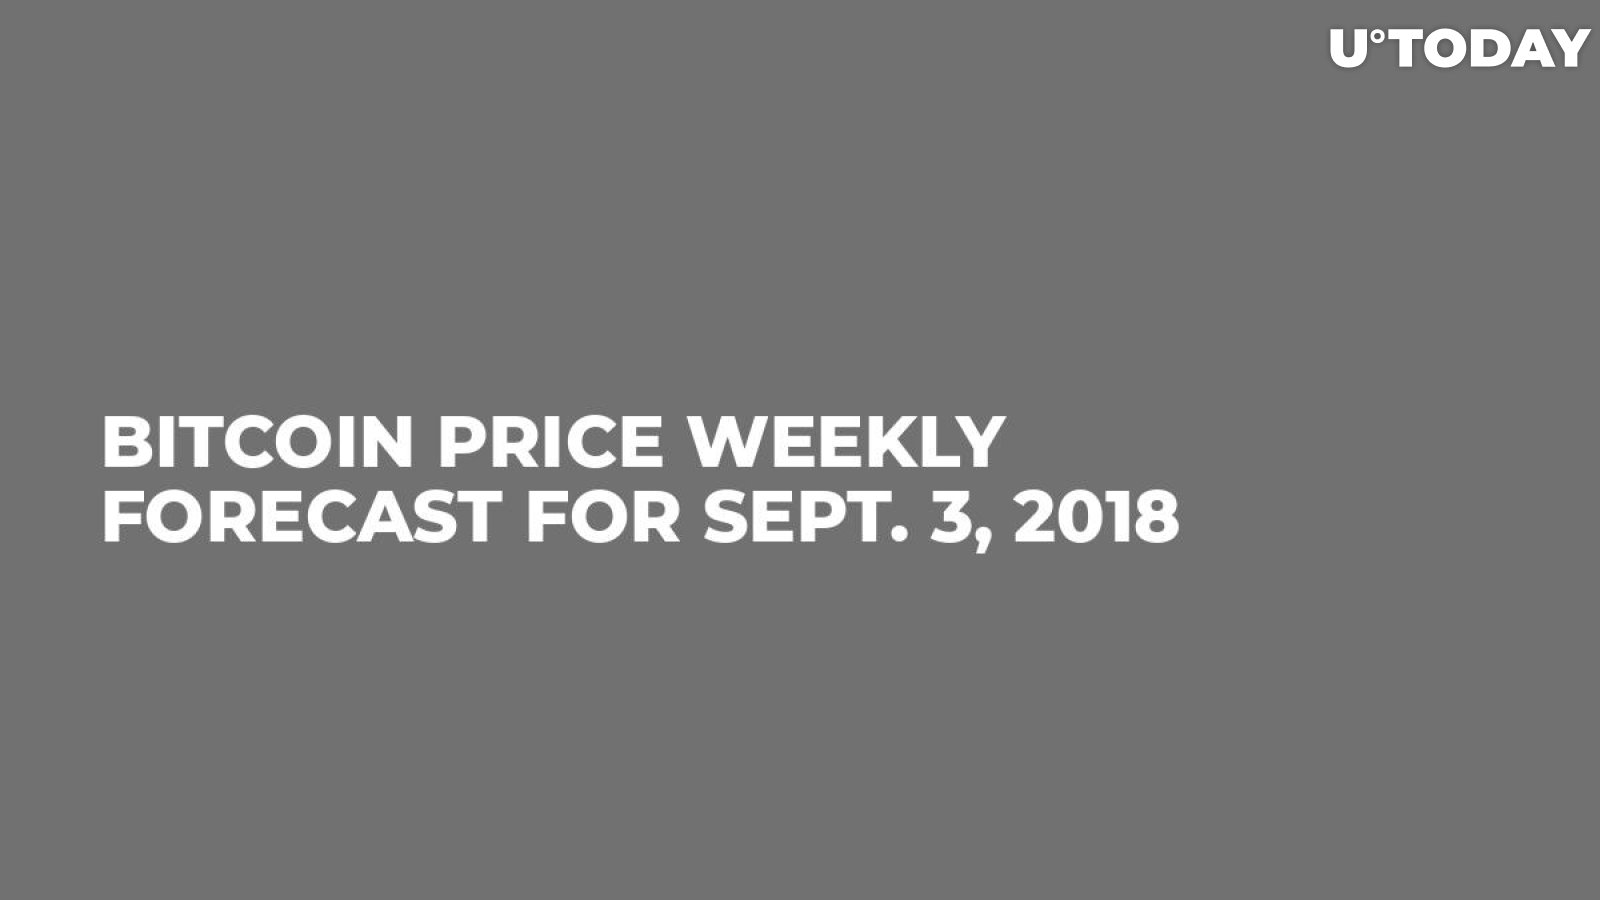 Bitcoin Price Weekly Forecast For Sept. 3, 2018